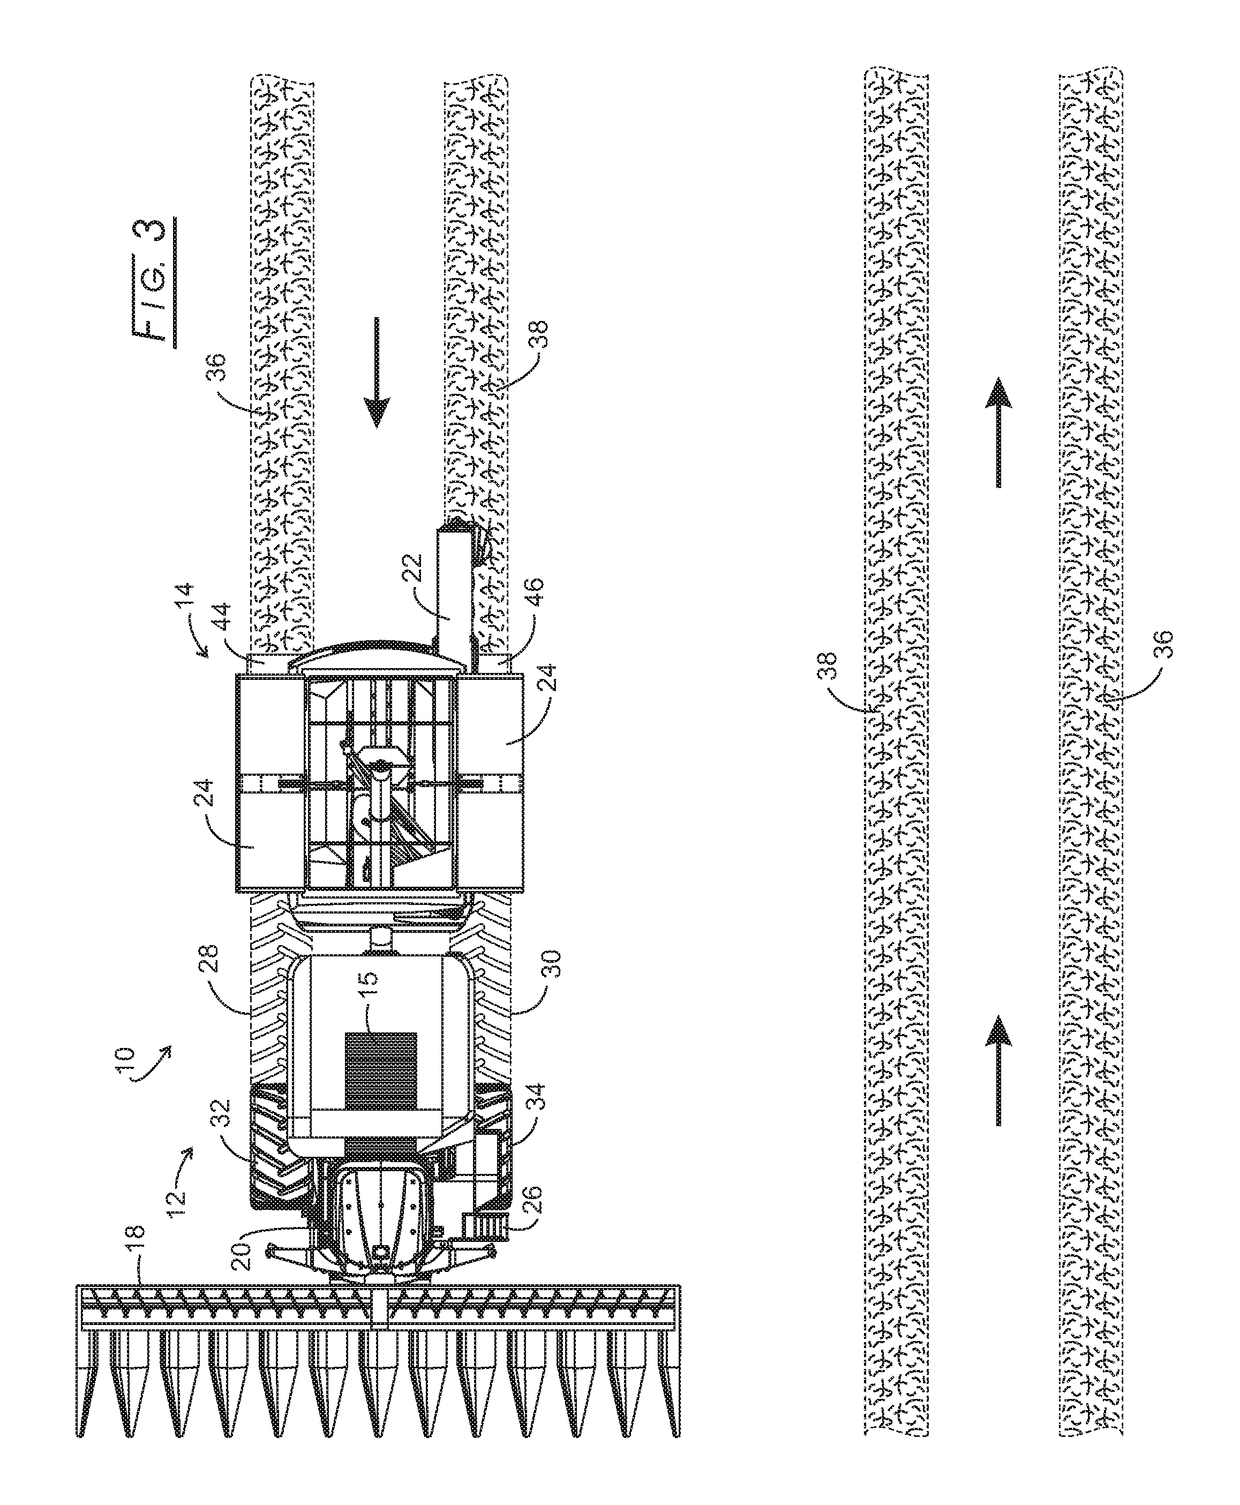 Soil compaction mitigation assembly and method